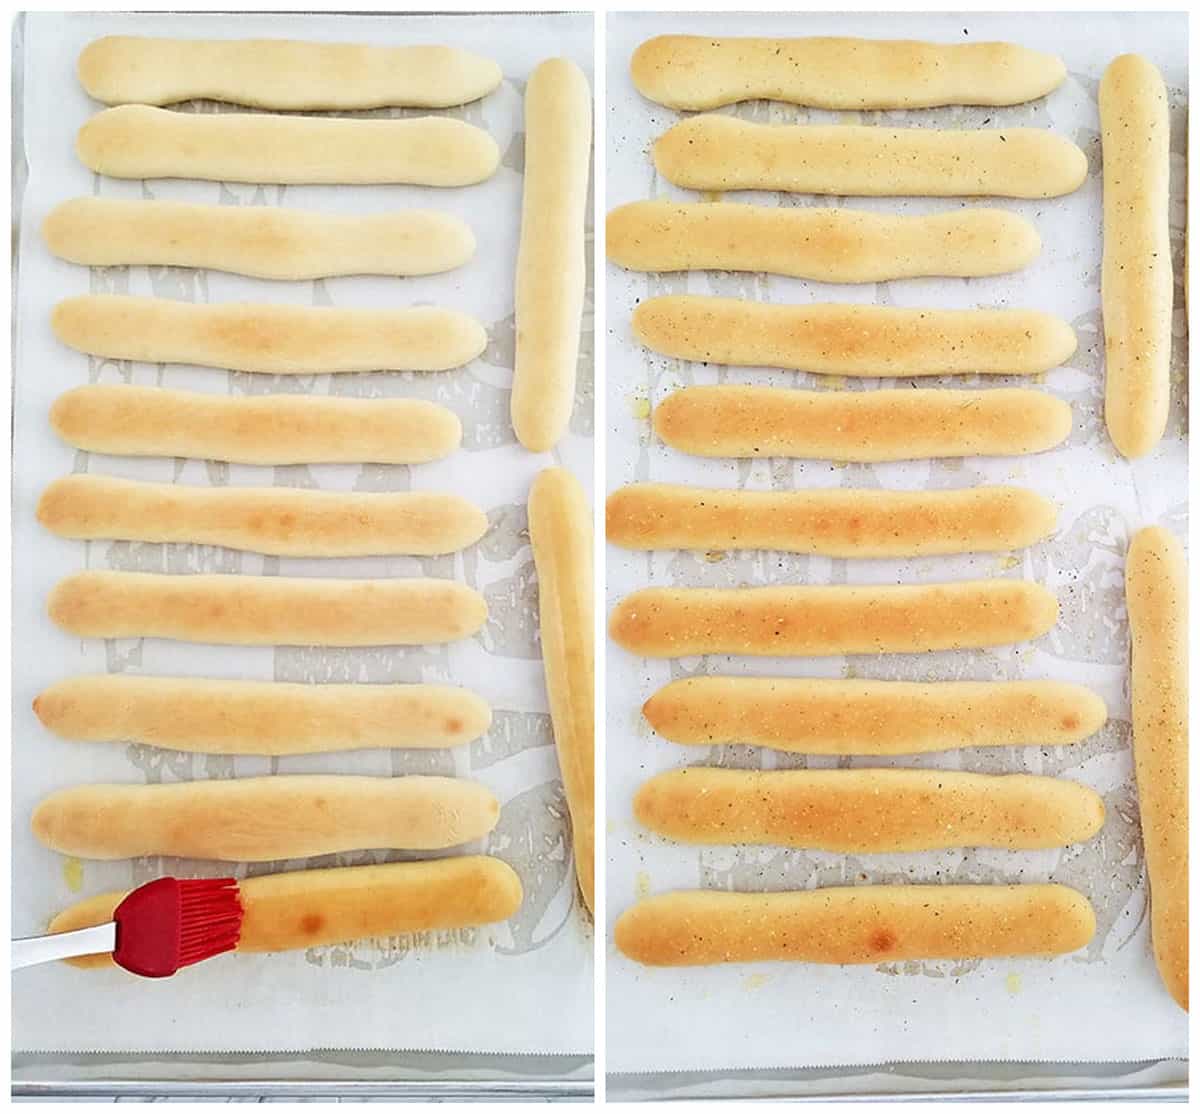 Remove from the oven, and immediately brush each breadstick with melted butter and sprinkle with garlic salt or garlic powder.